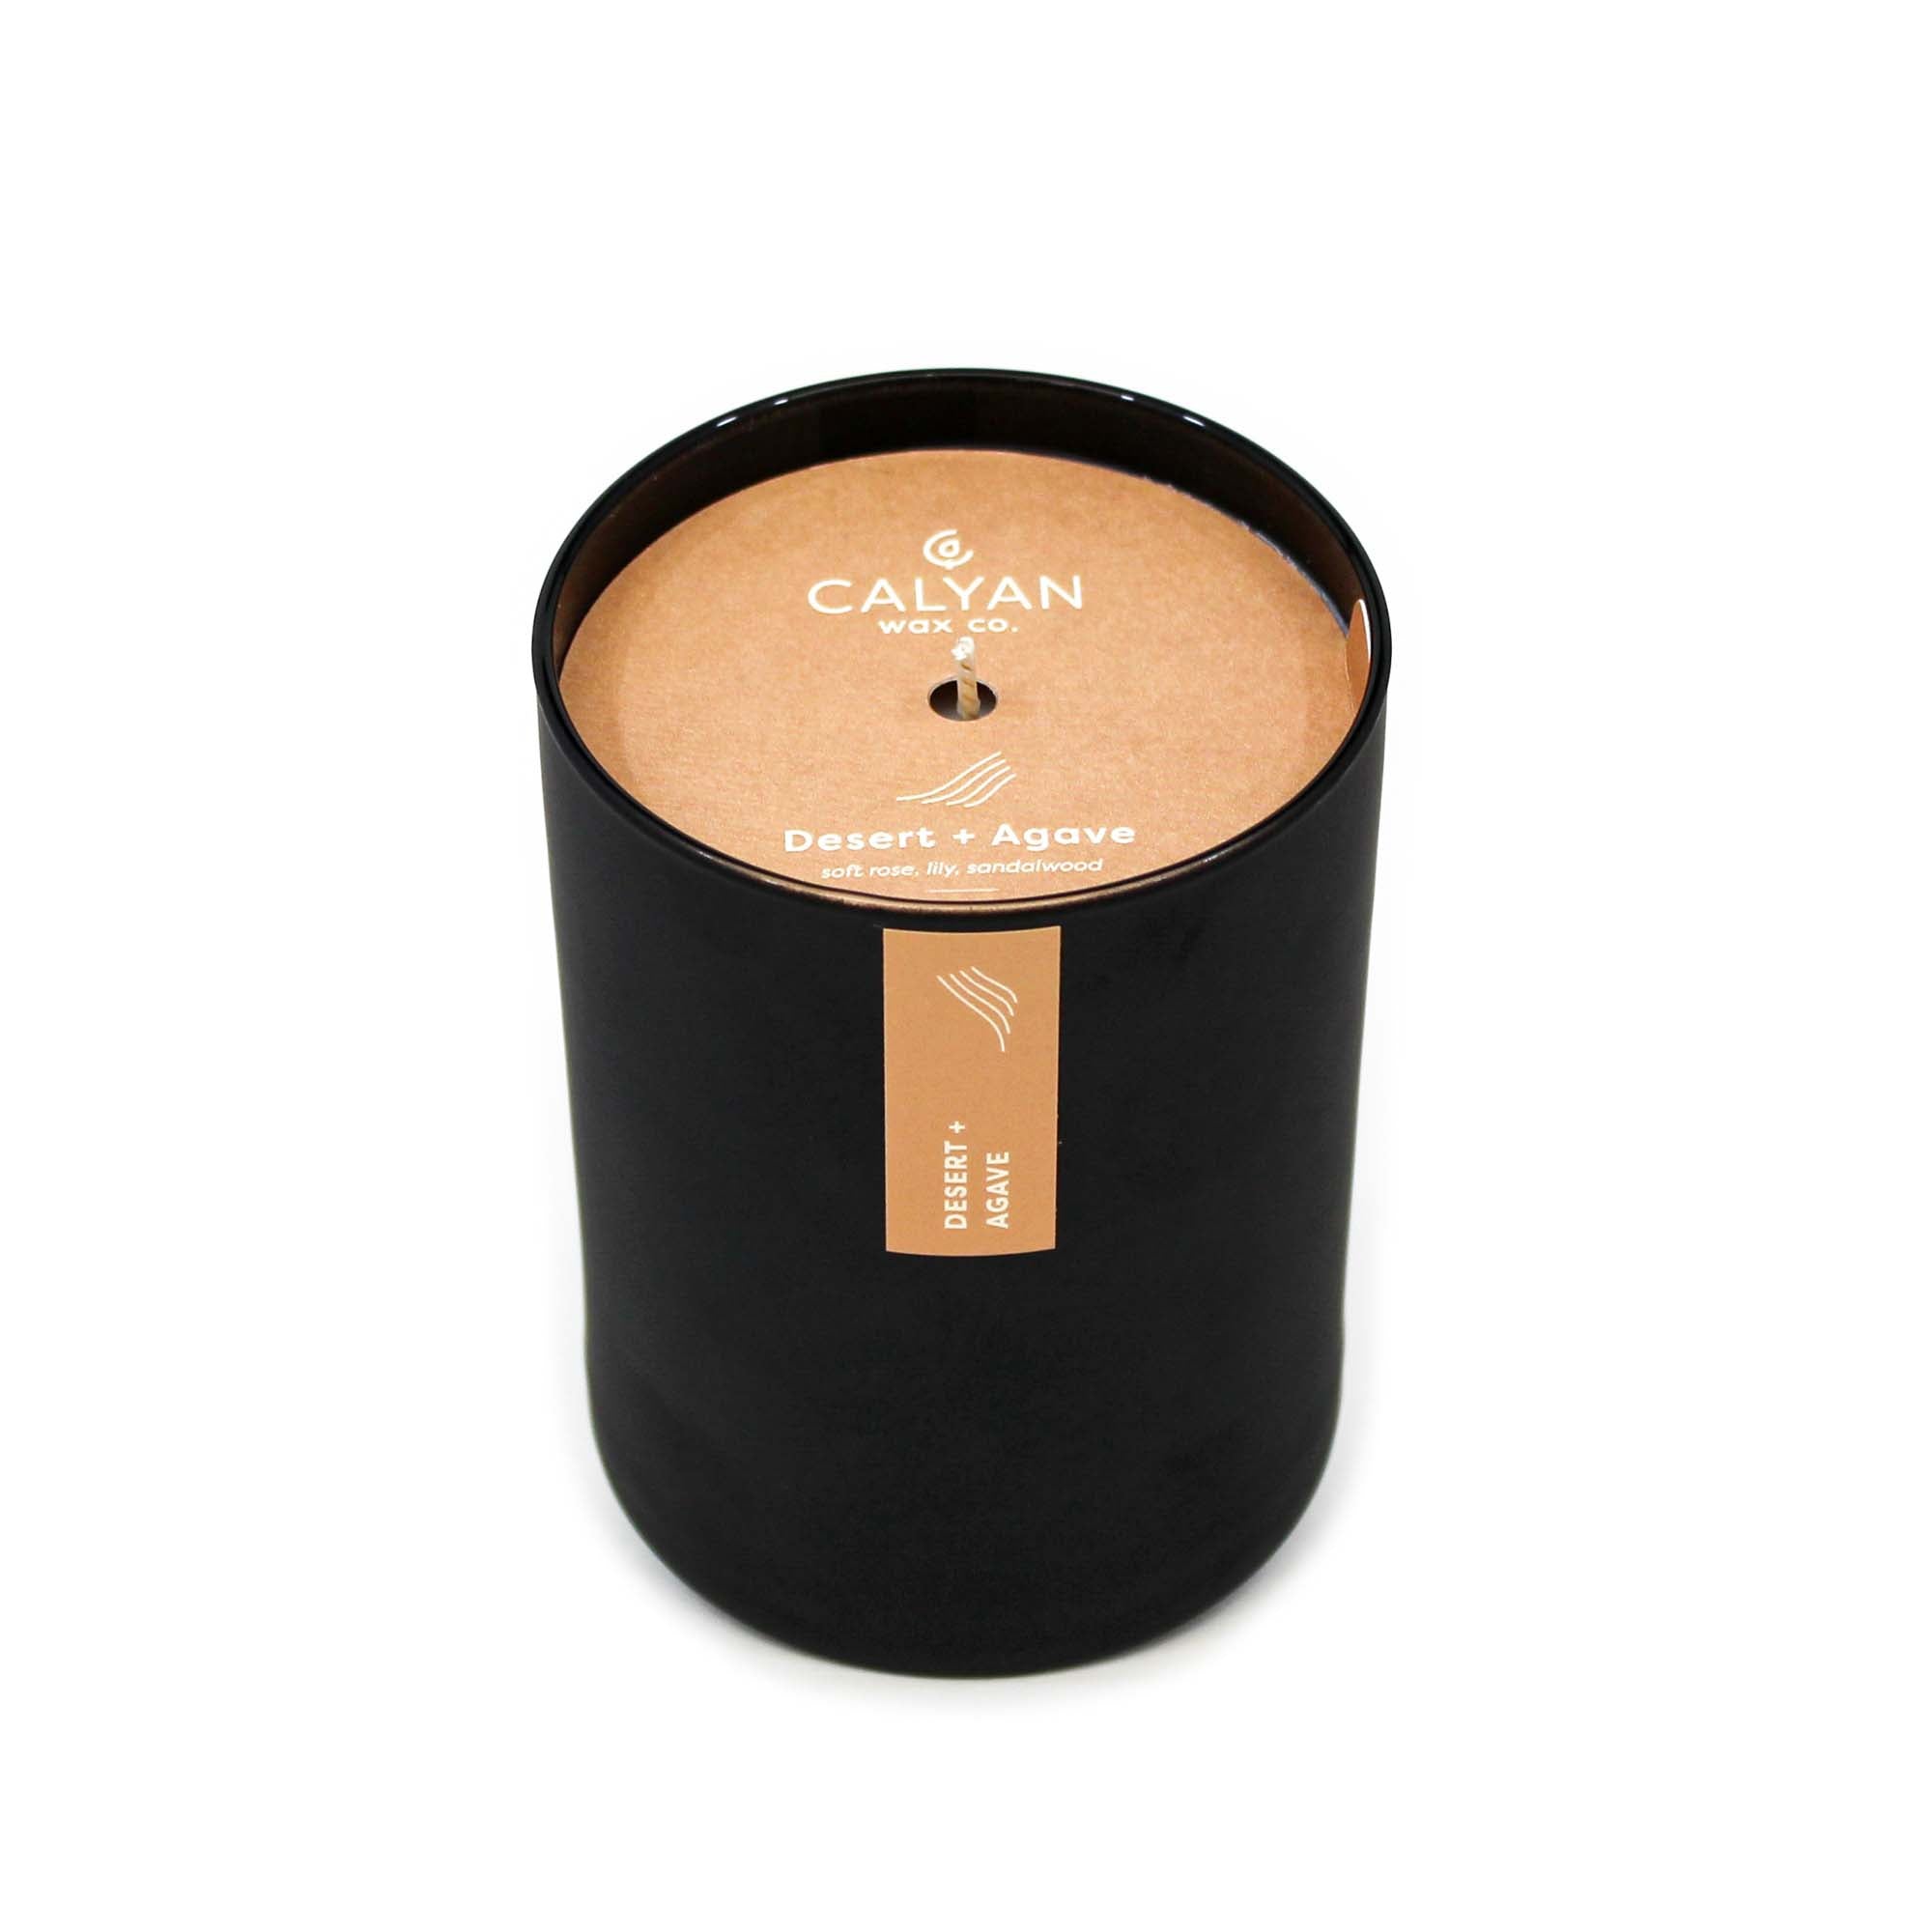 Black matte glass tumbler candle Desert + Agave fragrance from Calyan Wax Company